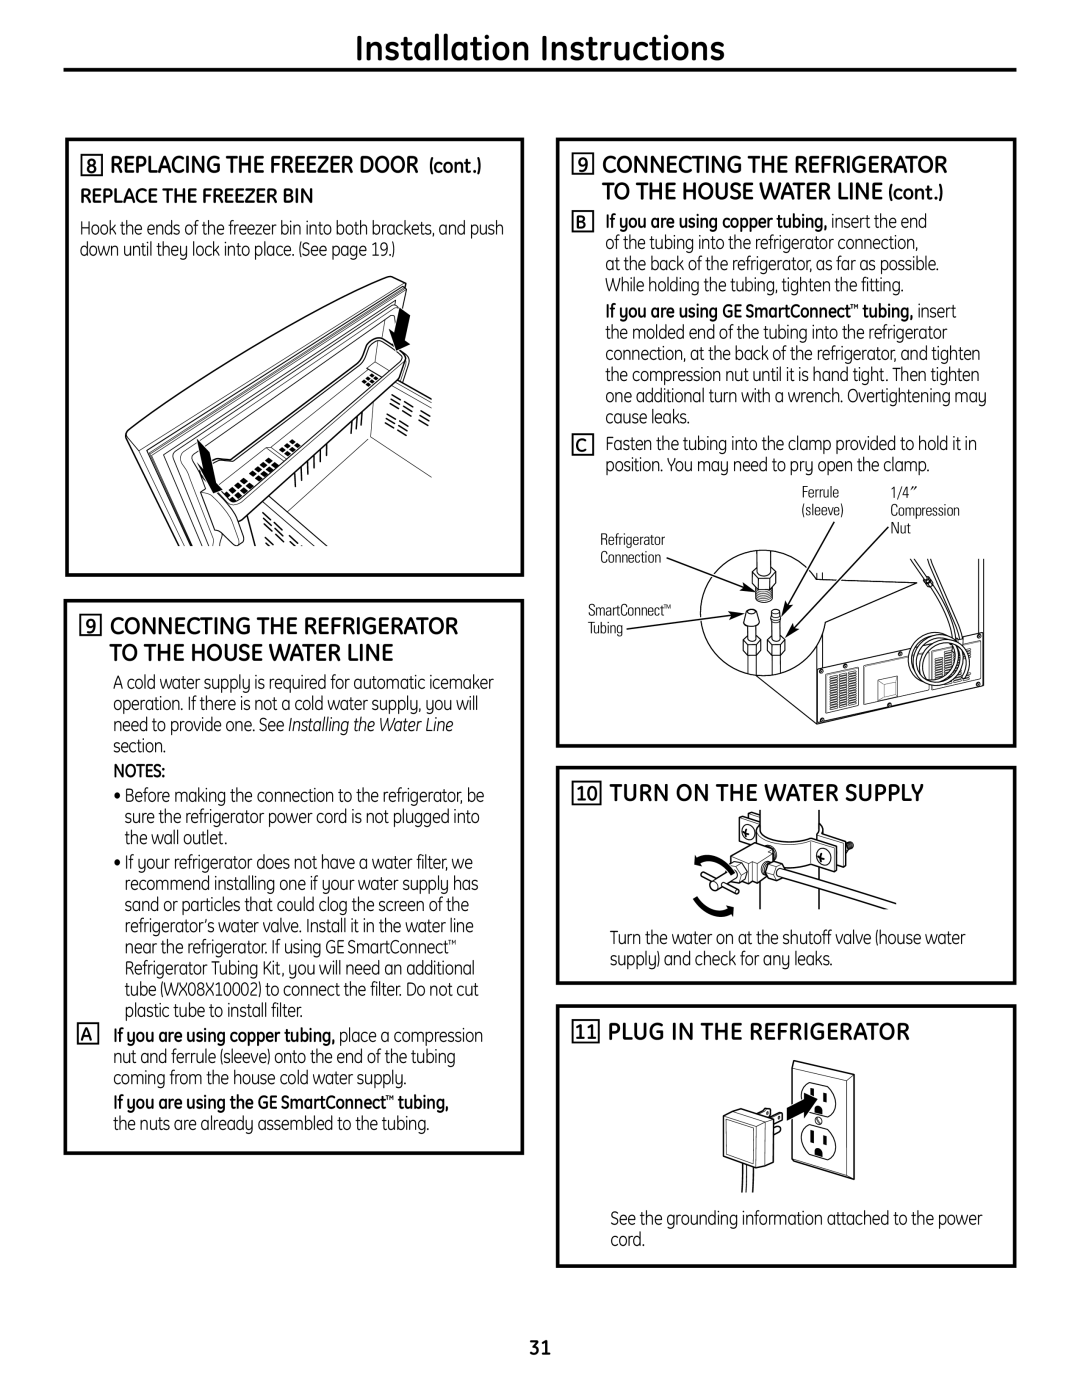 GE PFSS6SMXSS Turn On The Water Supply, Plug In The Refrigerator, Replace The Freezer Bin, Installation Instructions 